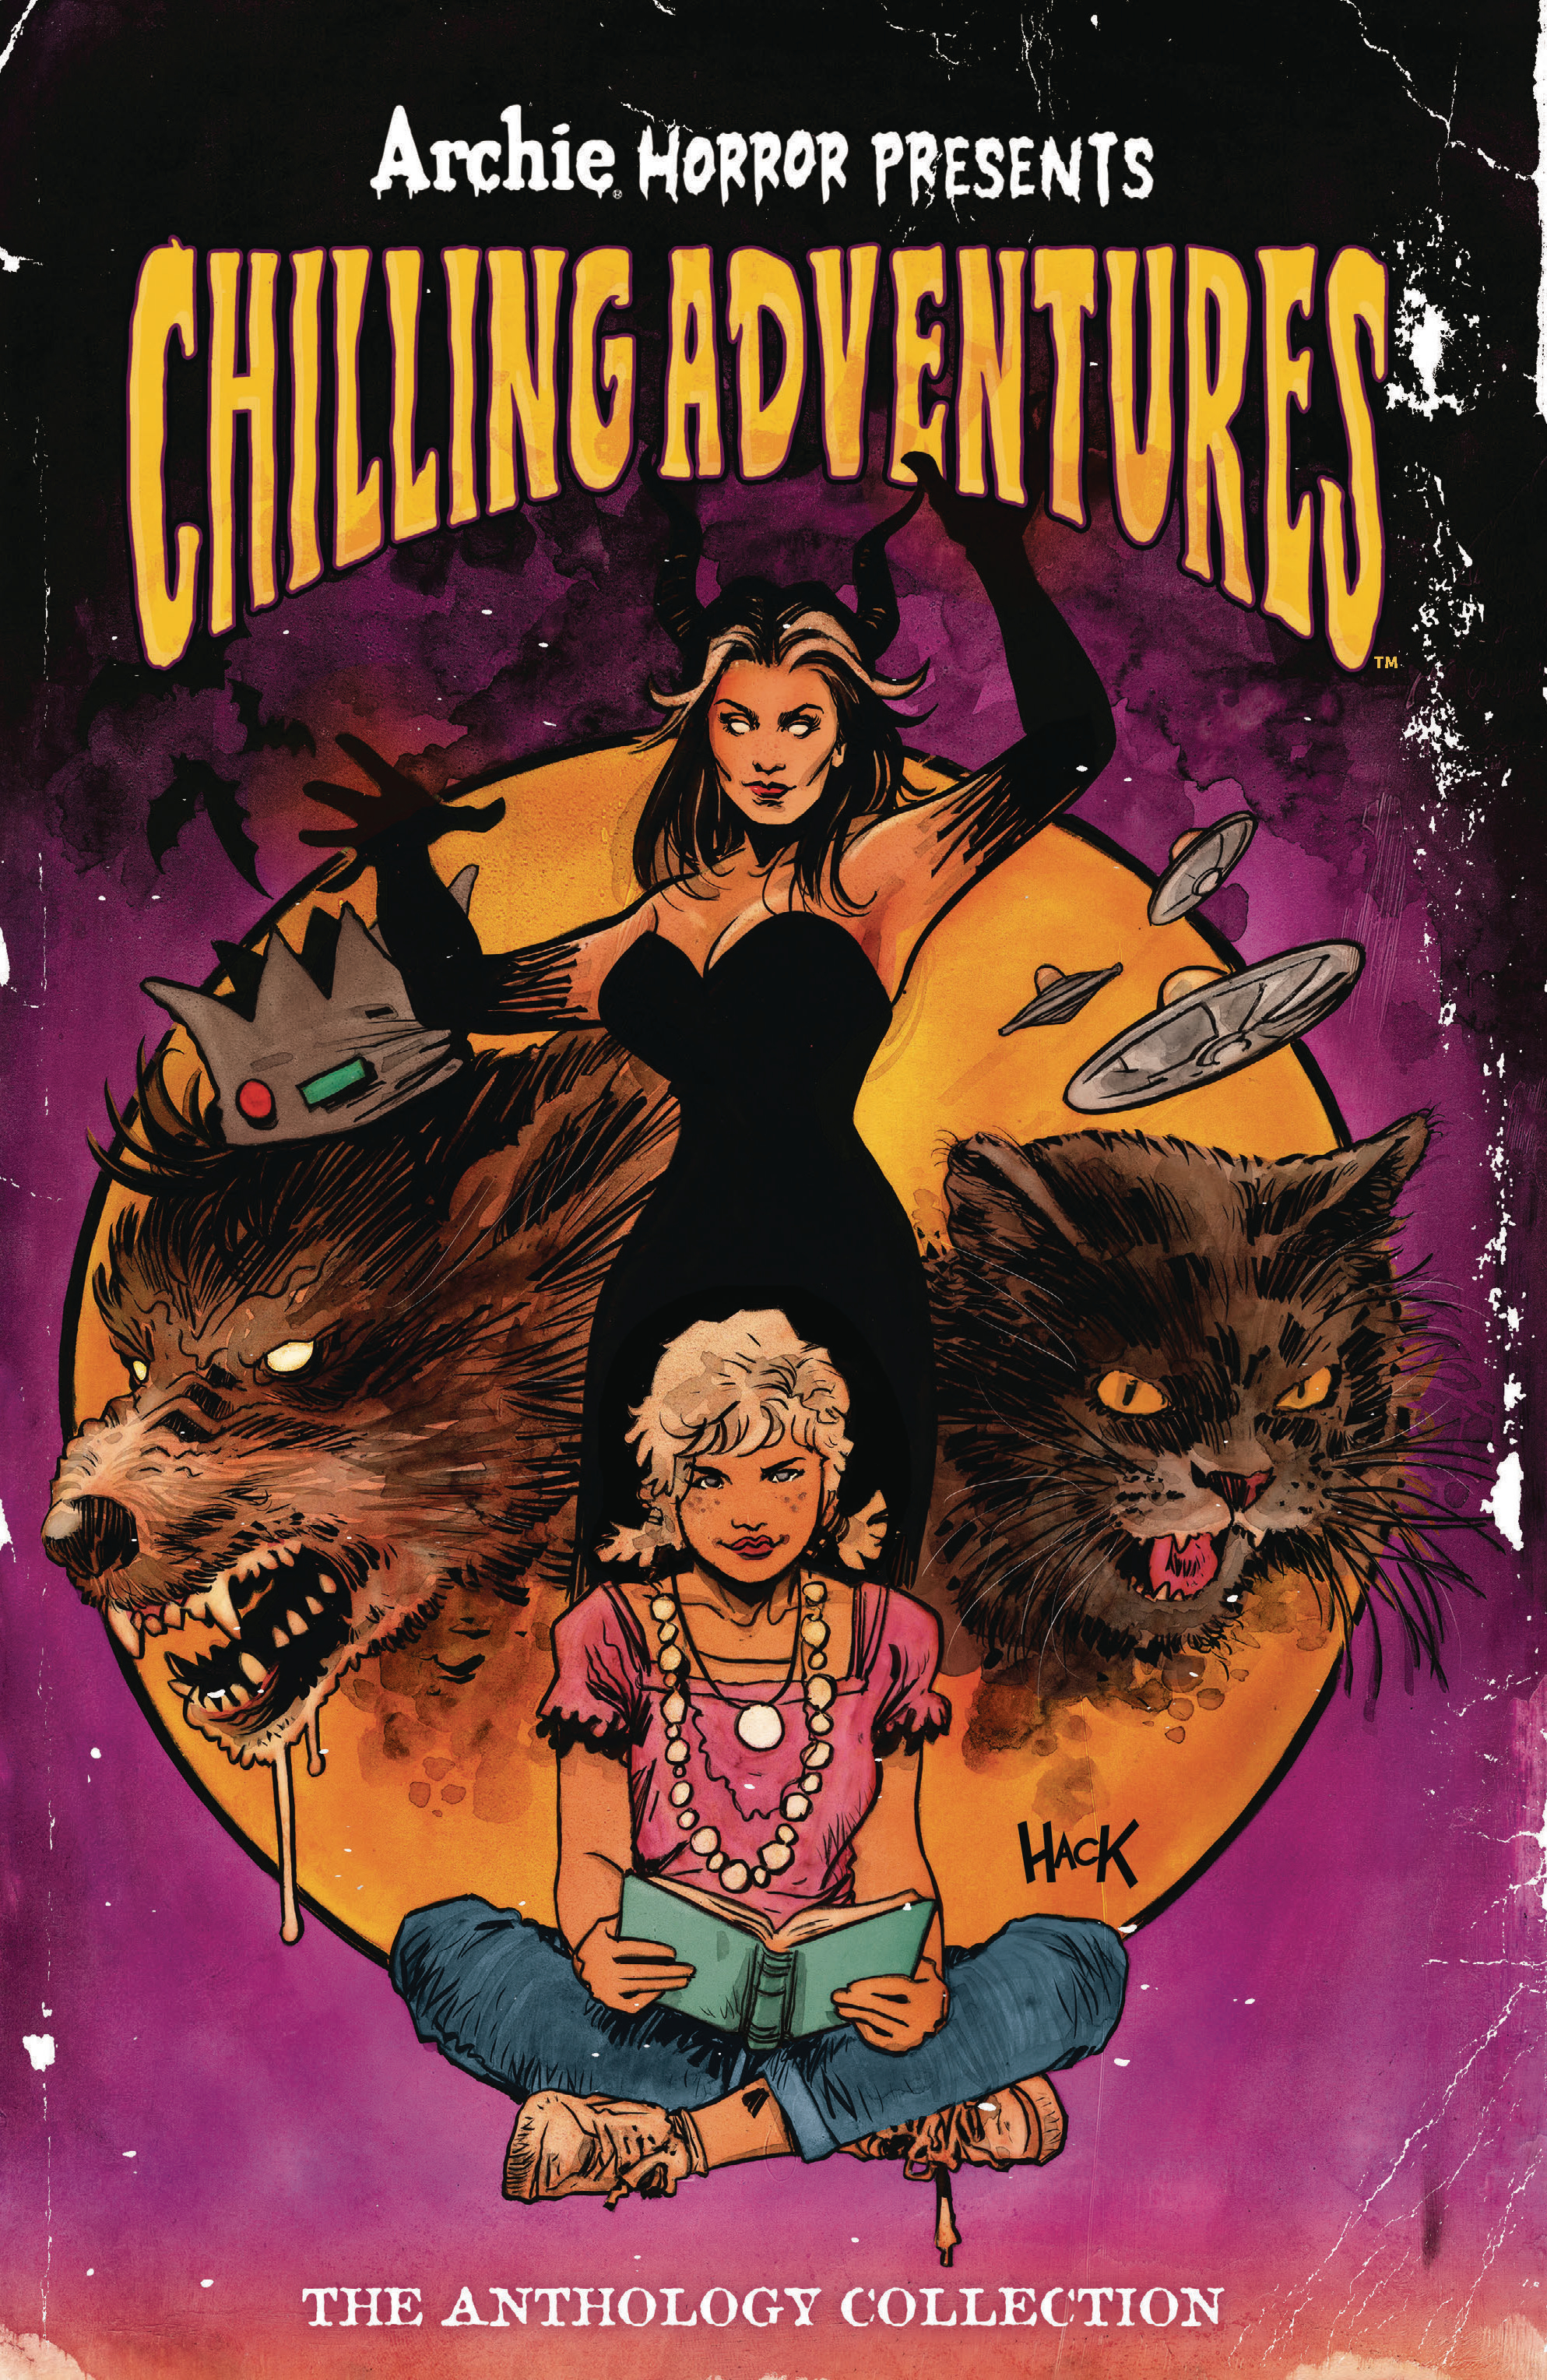 Archie Horror Presents: Chilling Adventures Graphic Novel